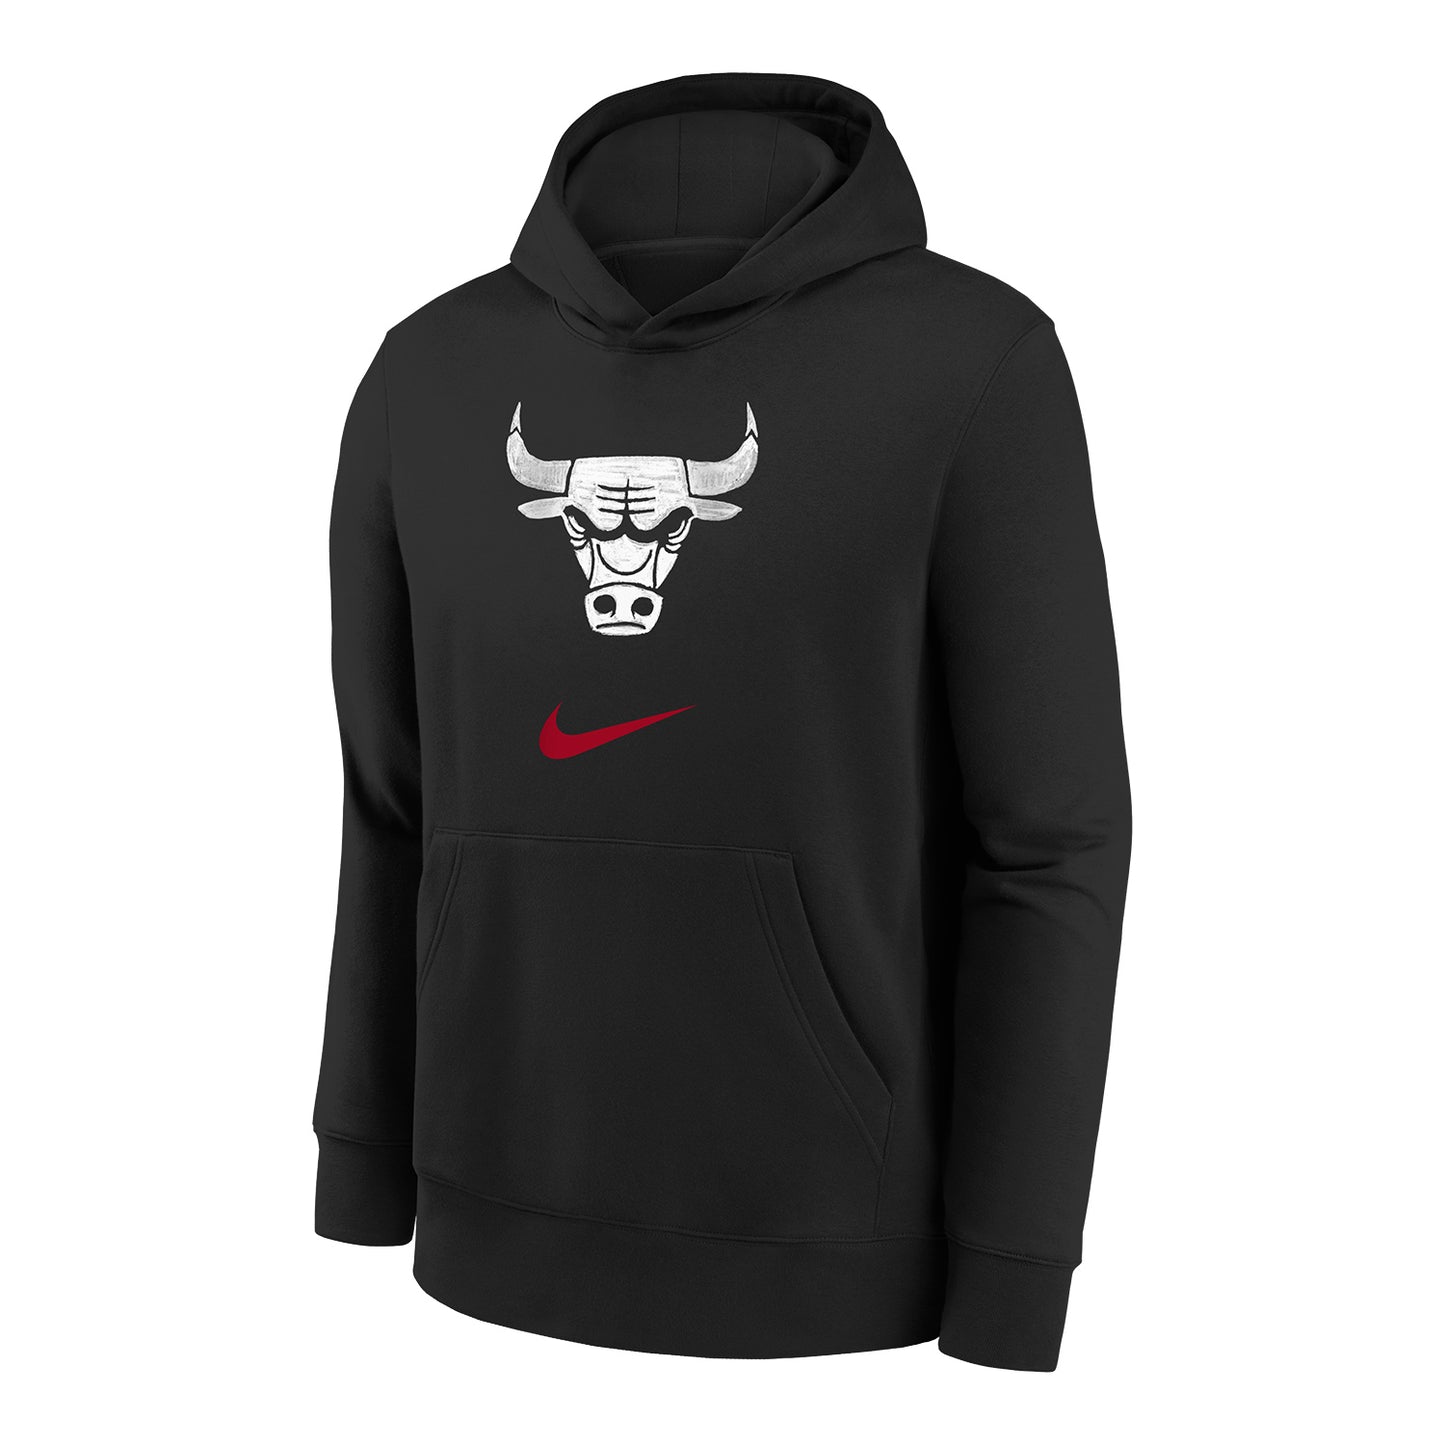 Youth Chicago Bulls City Edition Nike Club Fleece Hooded Sweatshirt - front view